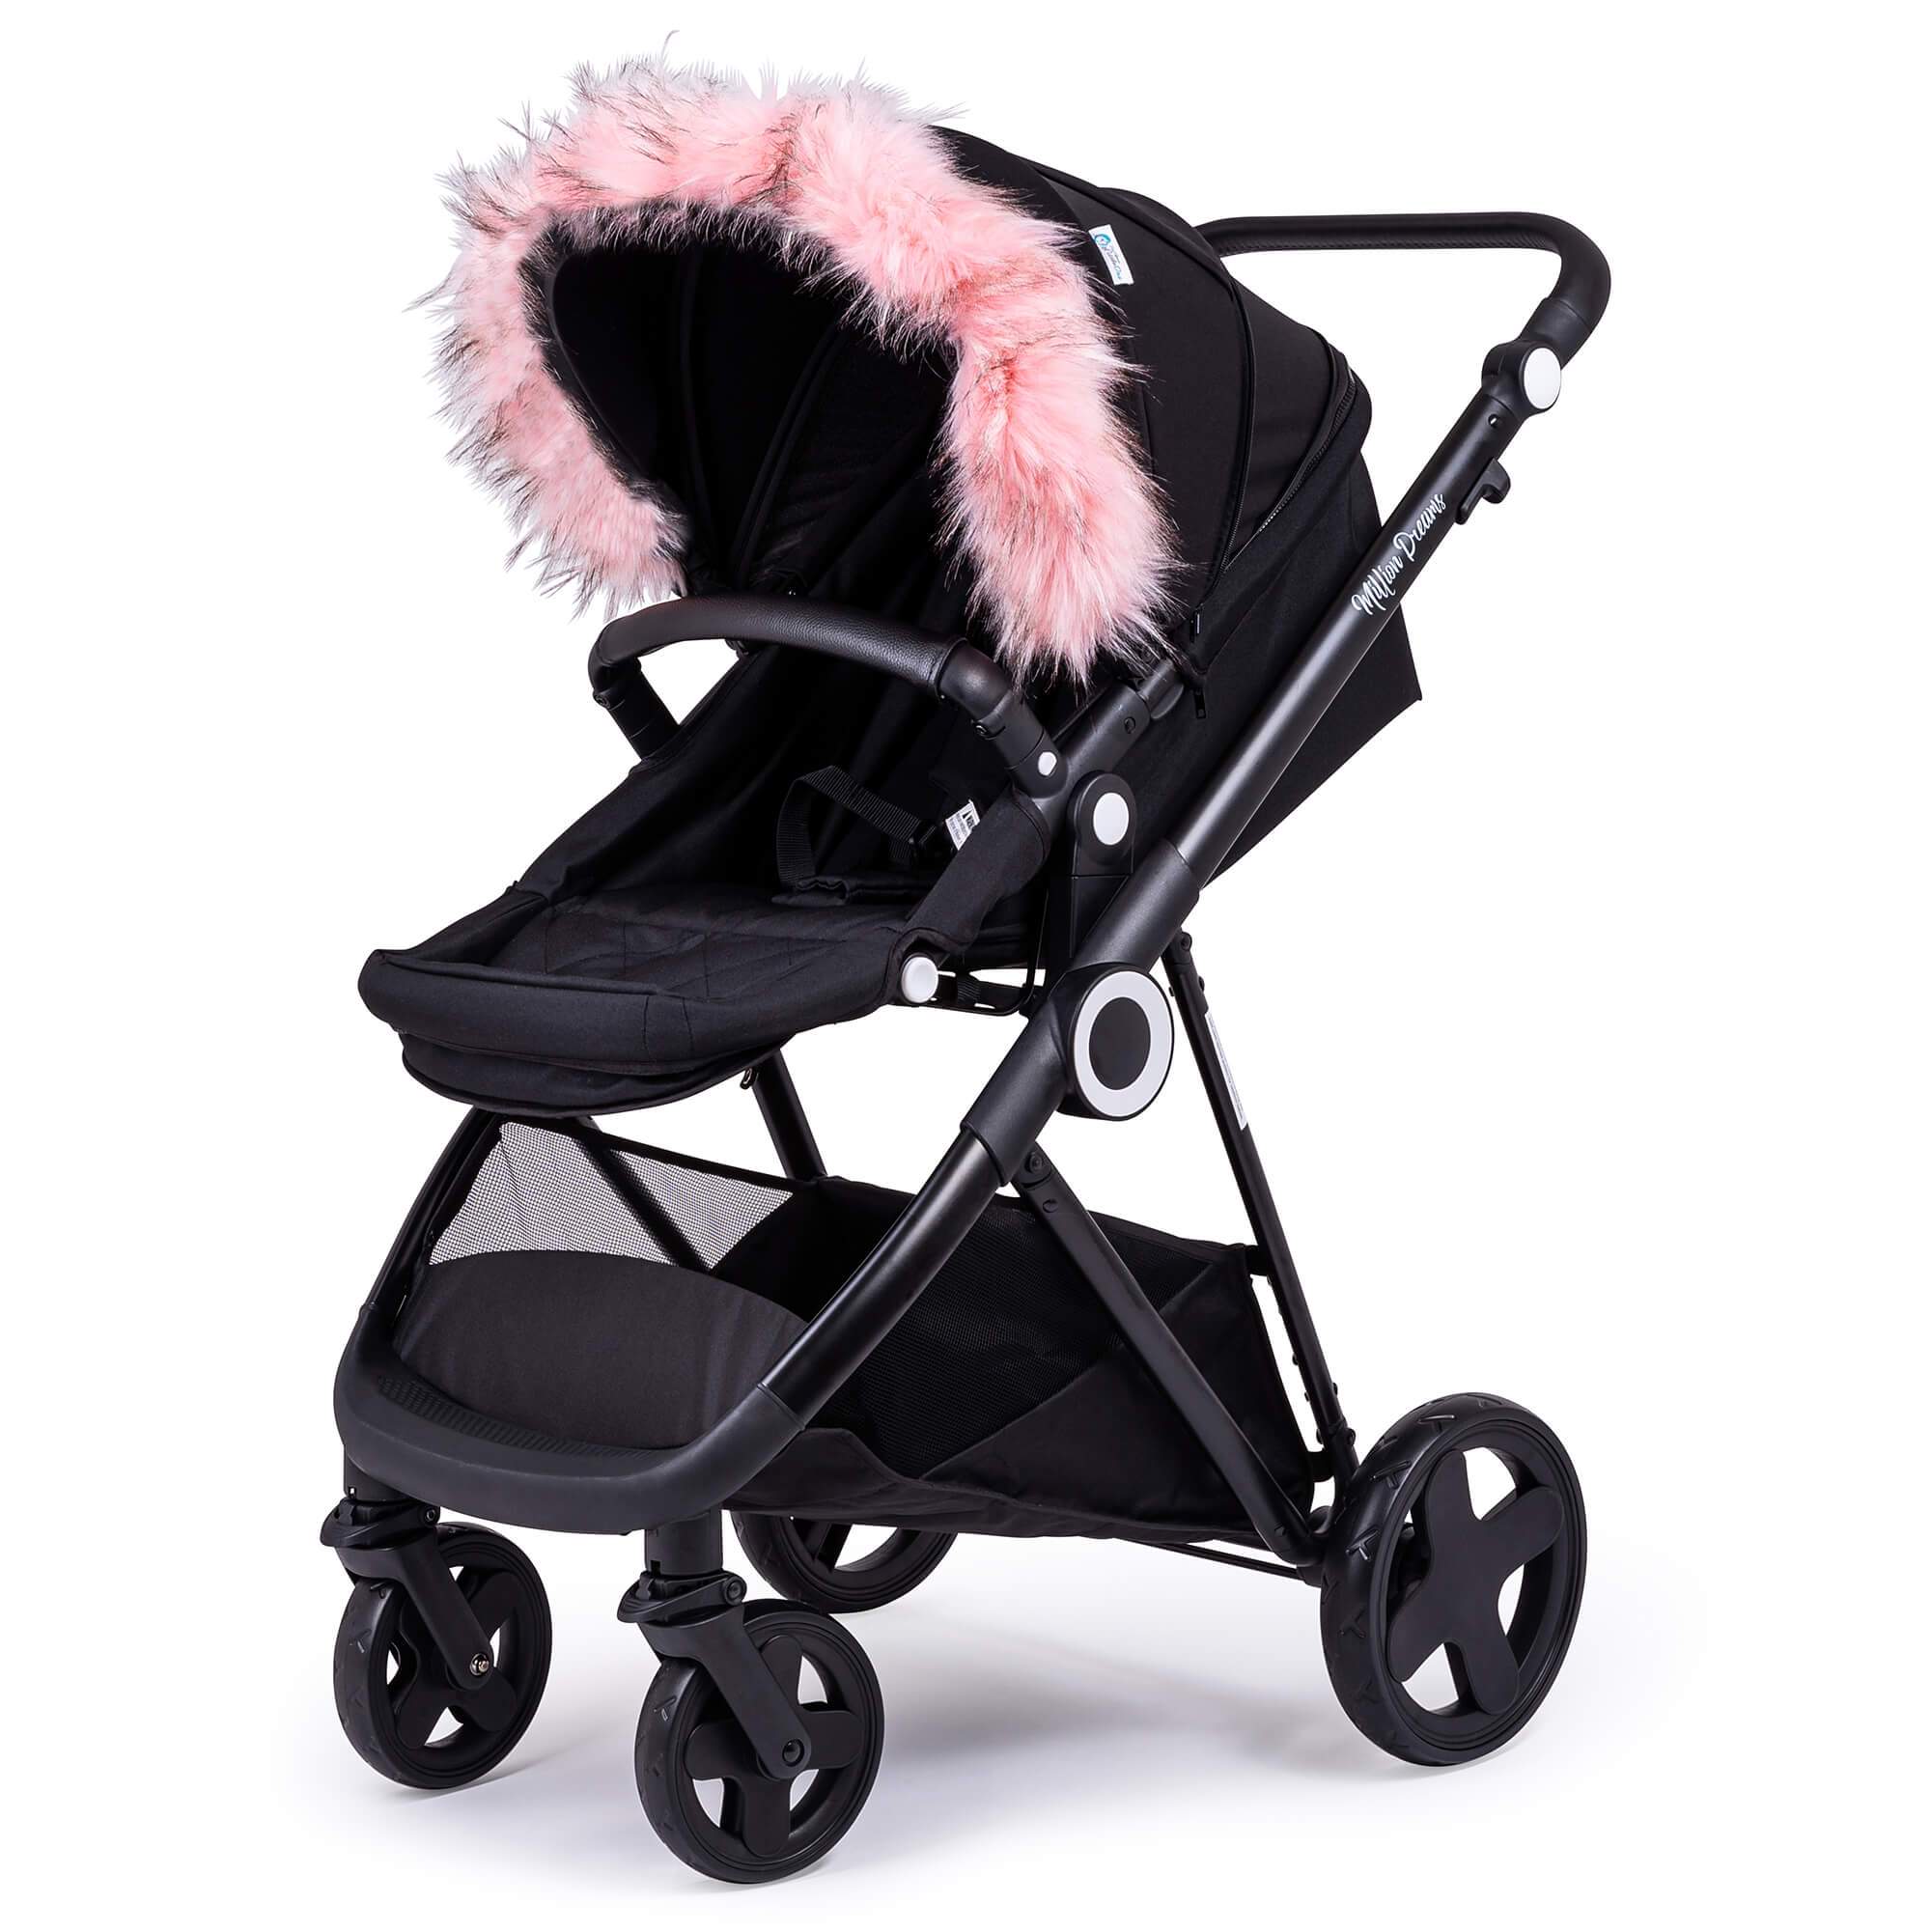 Pram Fur Hood Trim Attachment for Pushchair Compatible with Red Kite - Light Pink / Fits All Models | For Your Little One